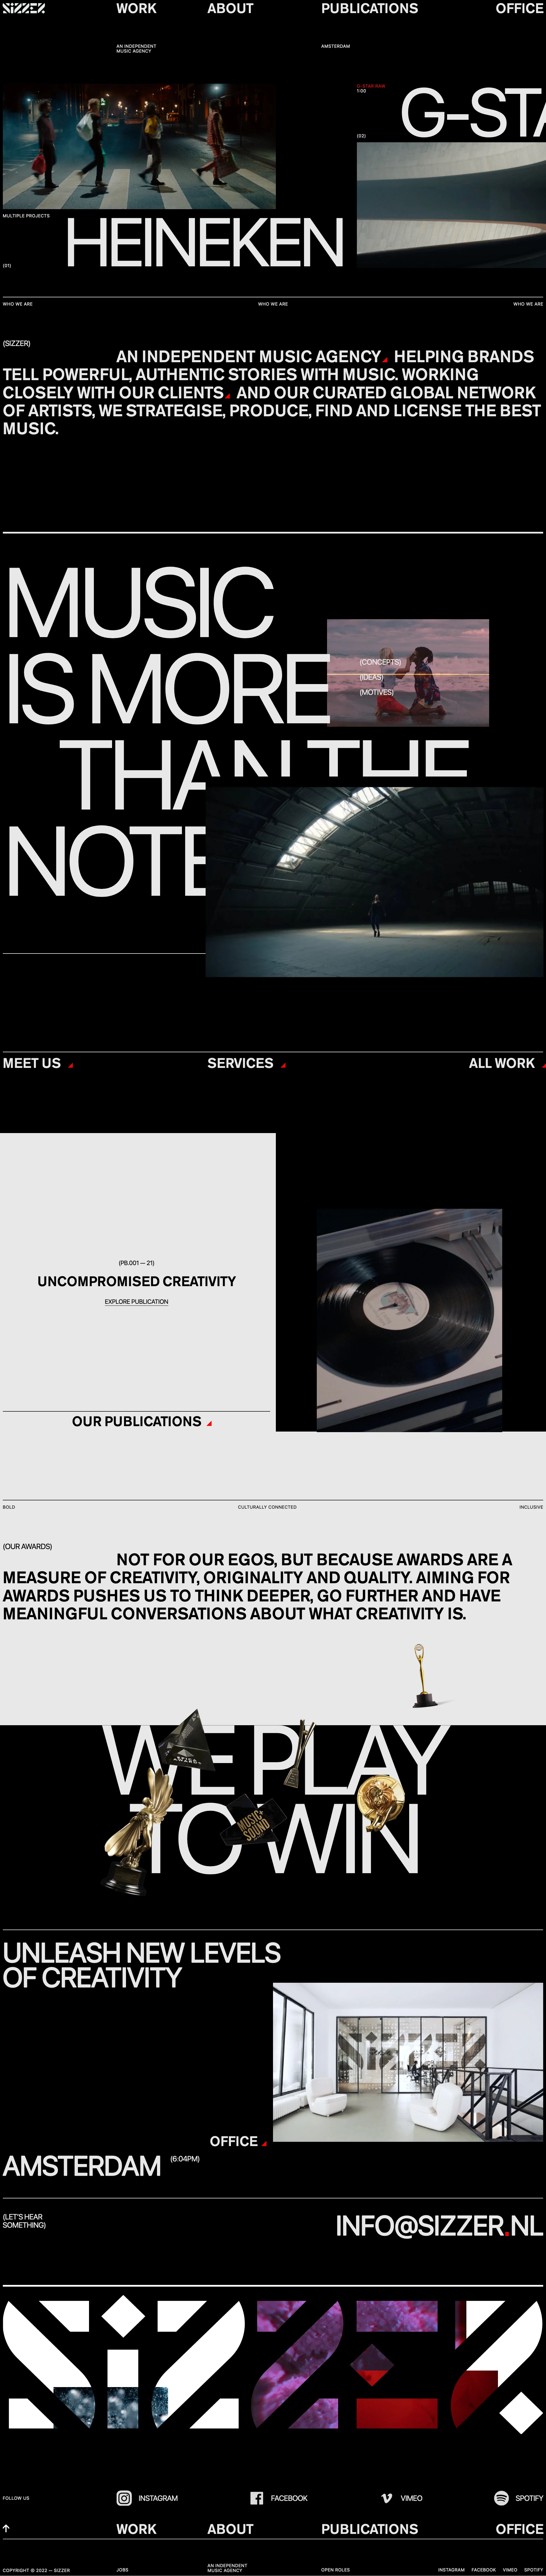 Sizzer Landing Page Example: We help brands tell powerful, authentic stories with music. Working with our clients and network of artists, we strategize, produce and license music.